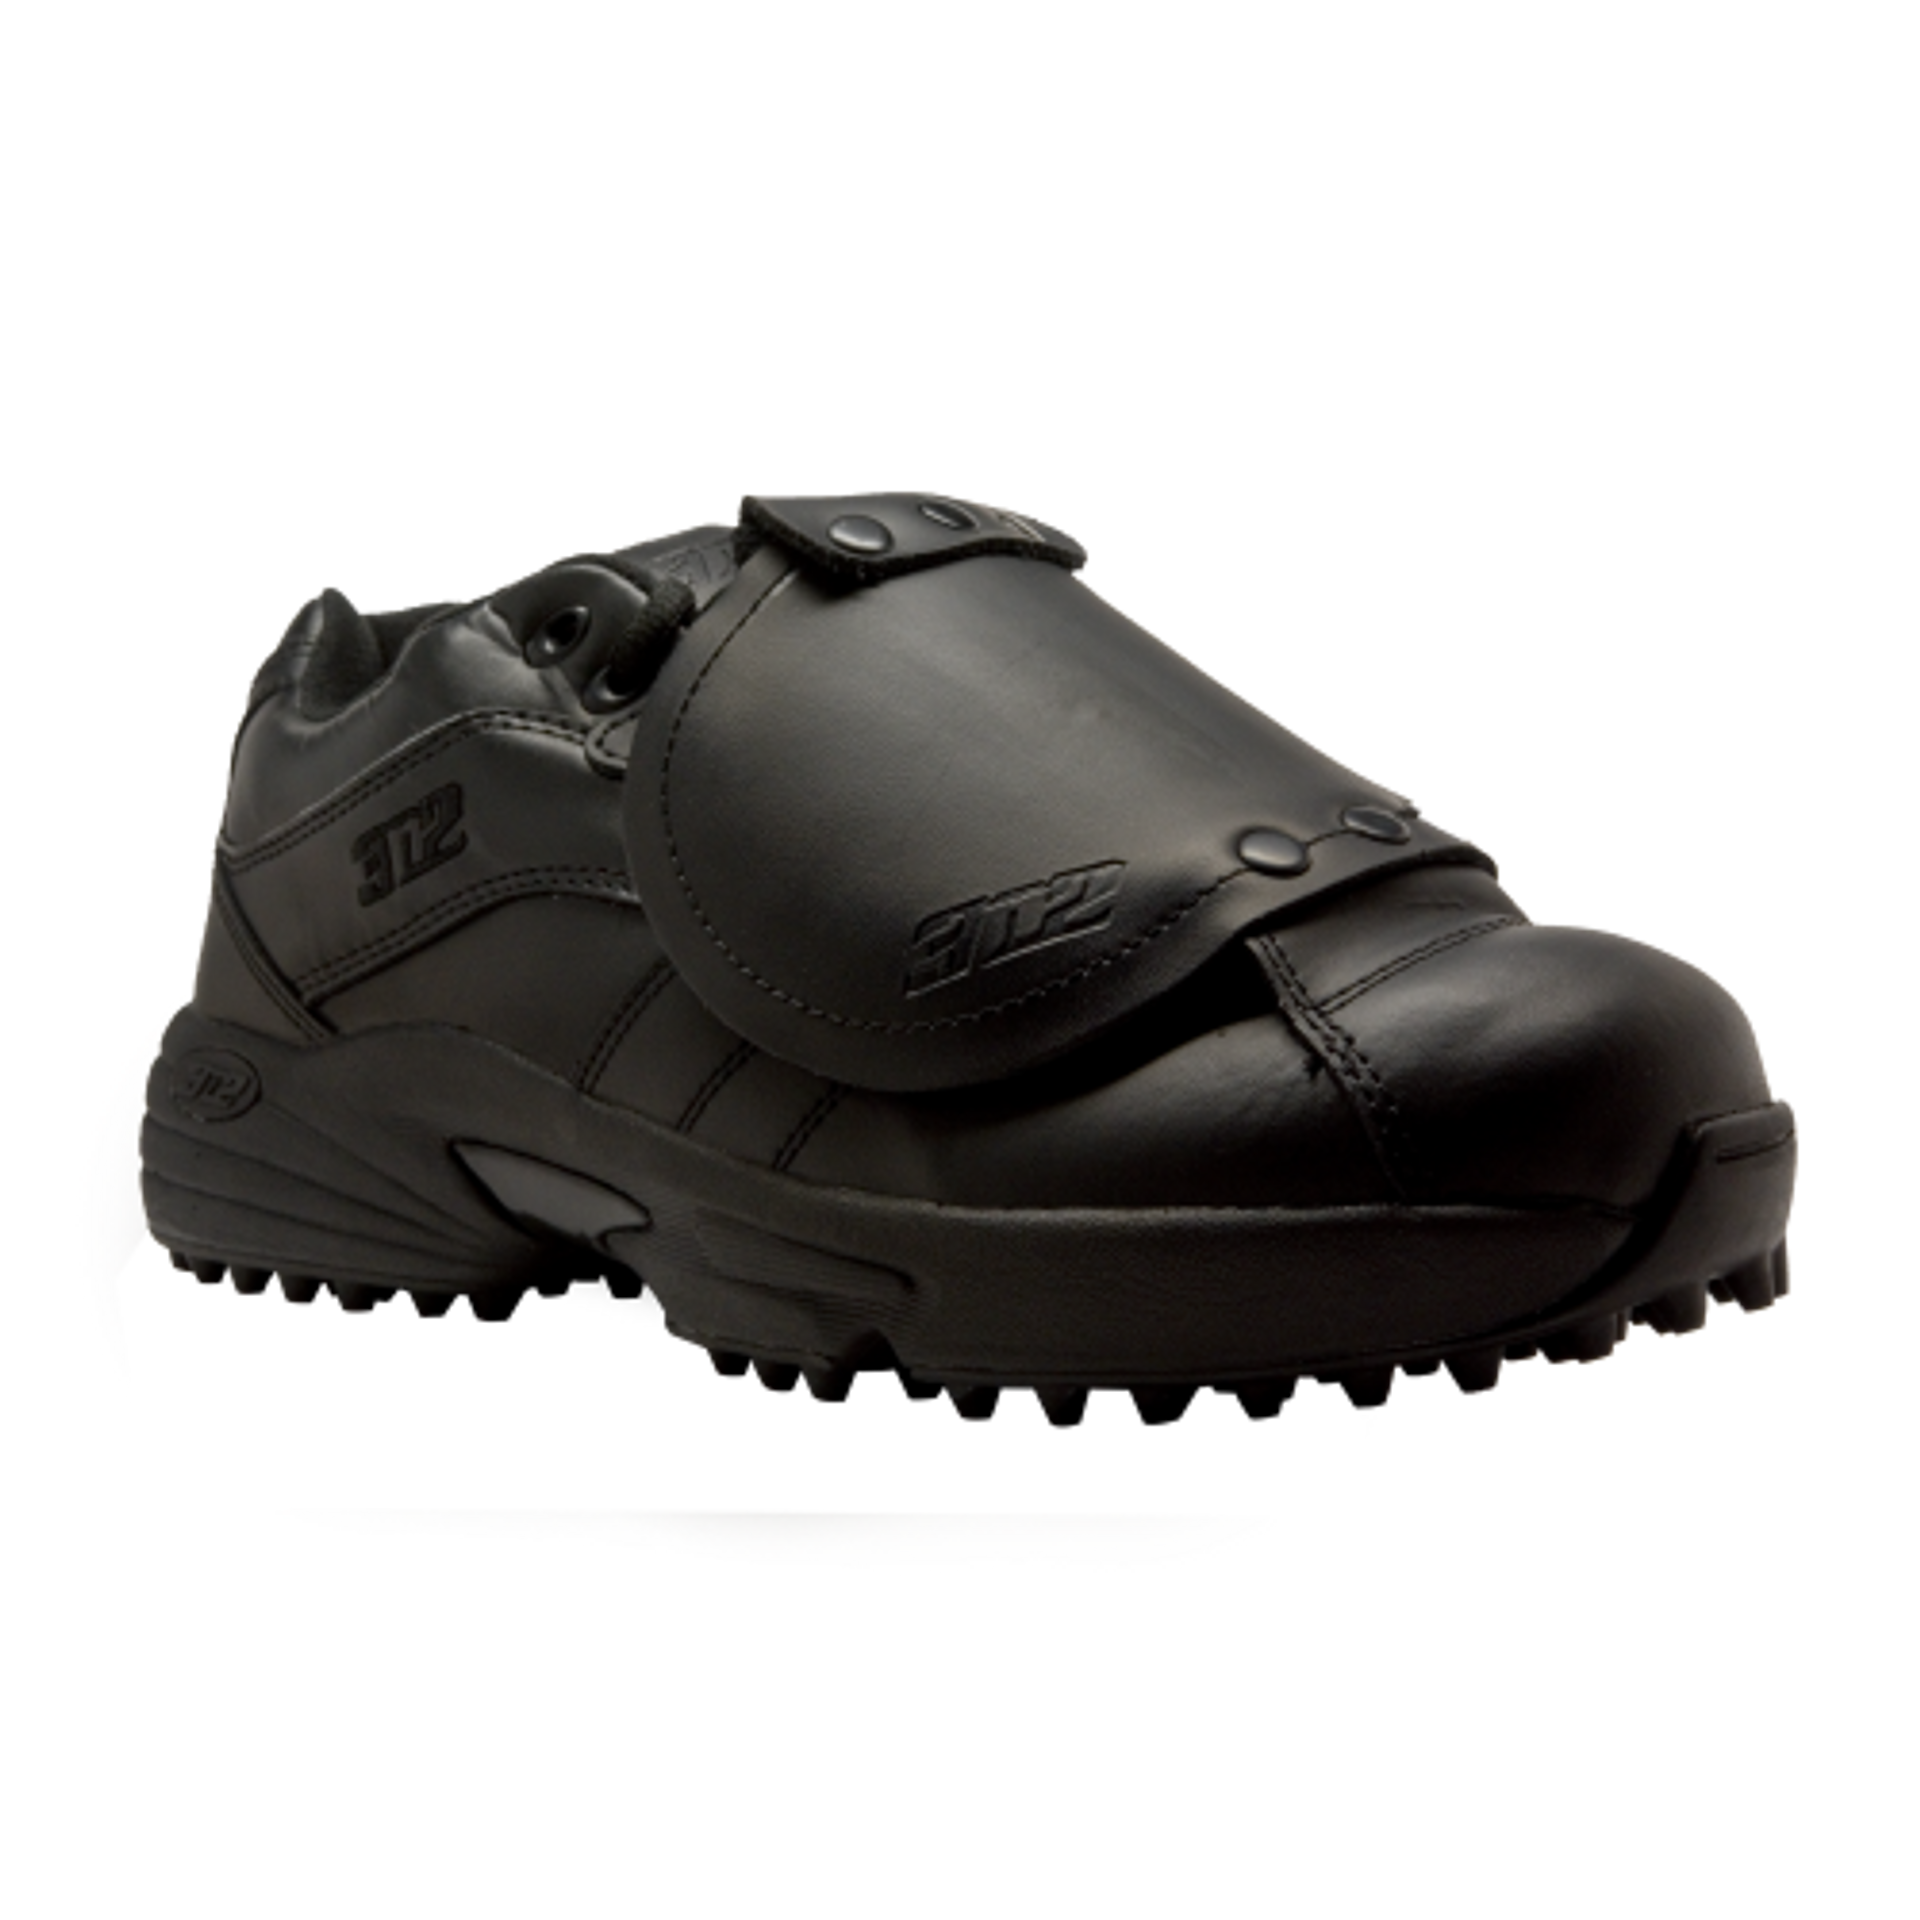 Umpire Plate Shoes | Referee and Umpire Equipment and Gear